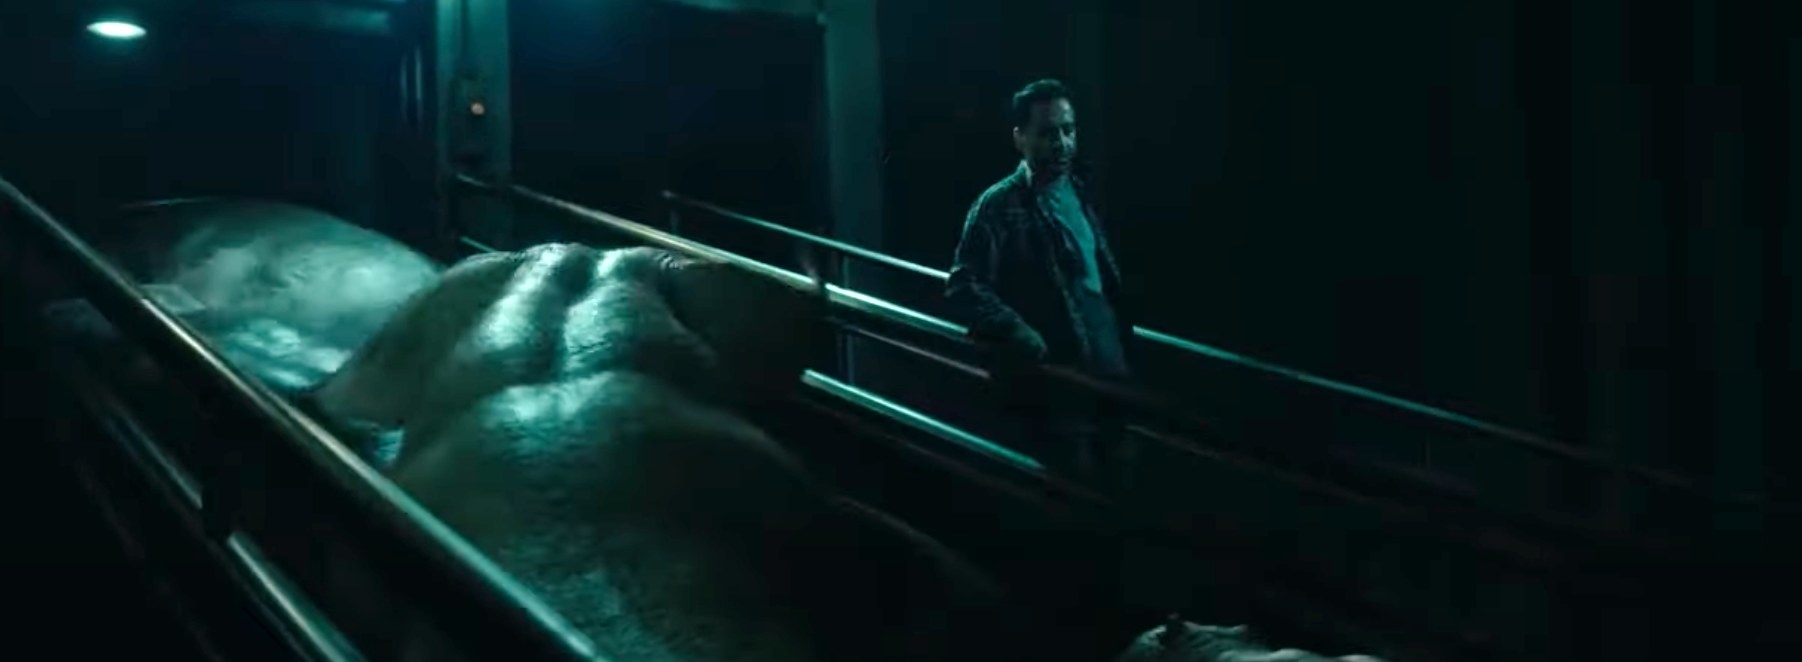 Slaughterhouse scene in Okja - animals are in a cattle being pushed forward